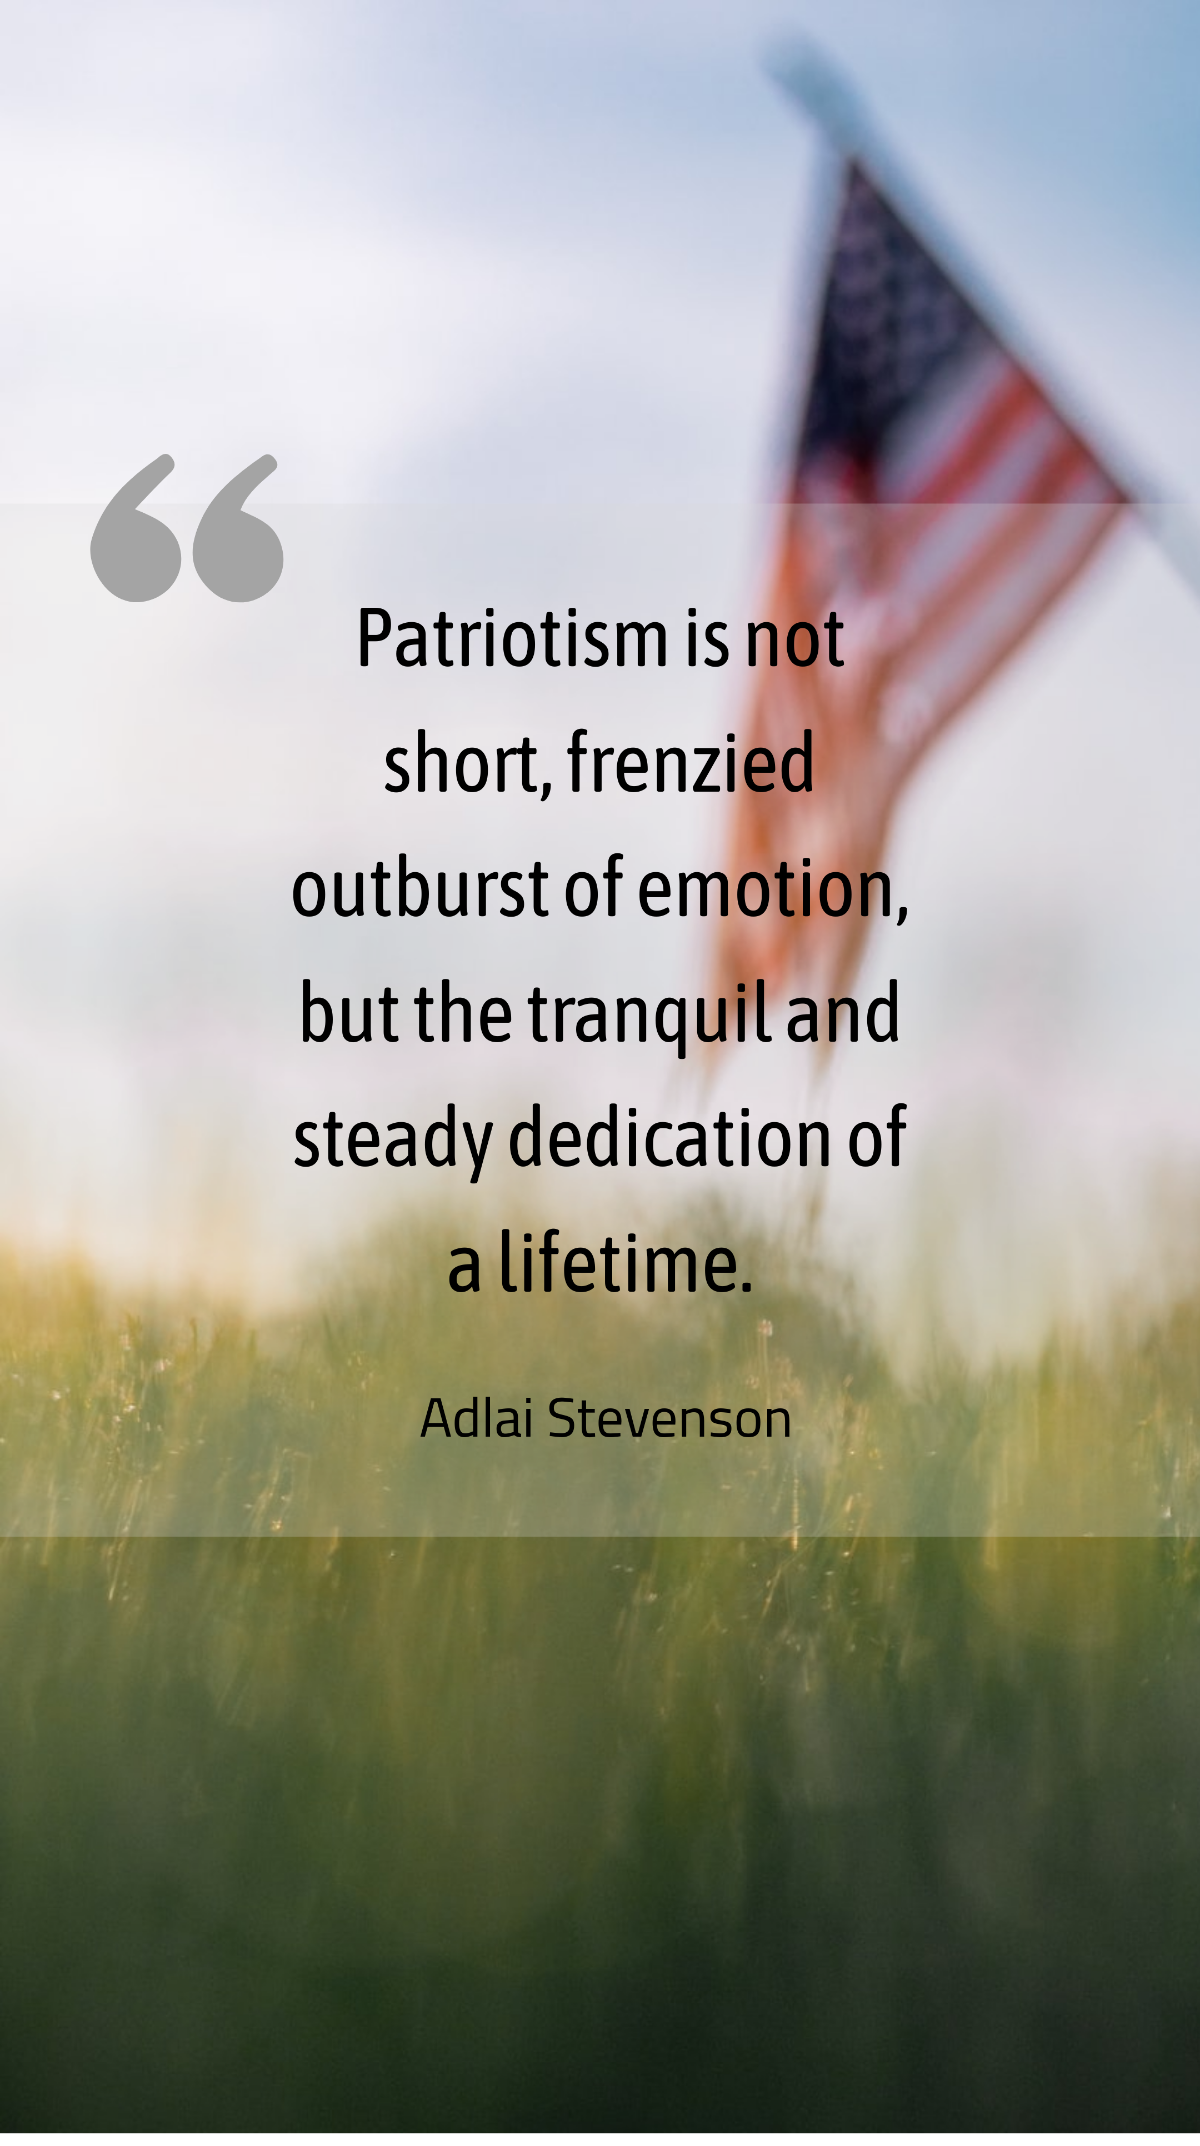 Free Adlai Stevenson - Patriotism is not short, frenzied outburst of emotion, but the tranquil and steady dedication of a lifetime. Template